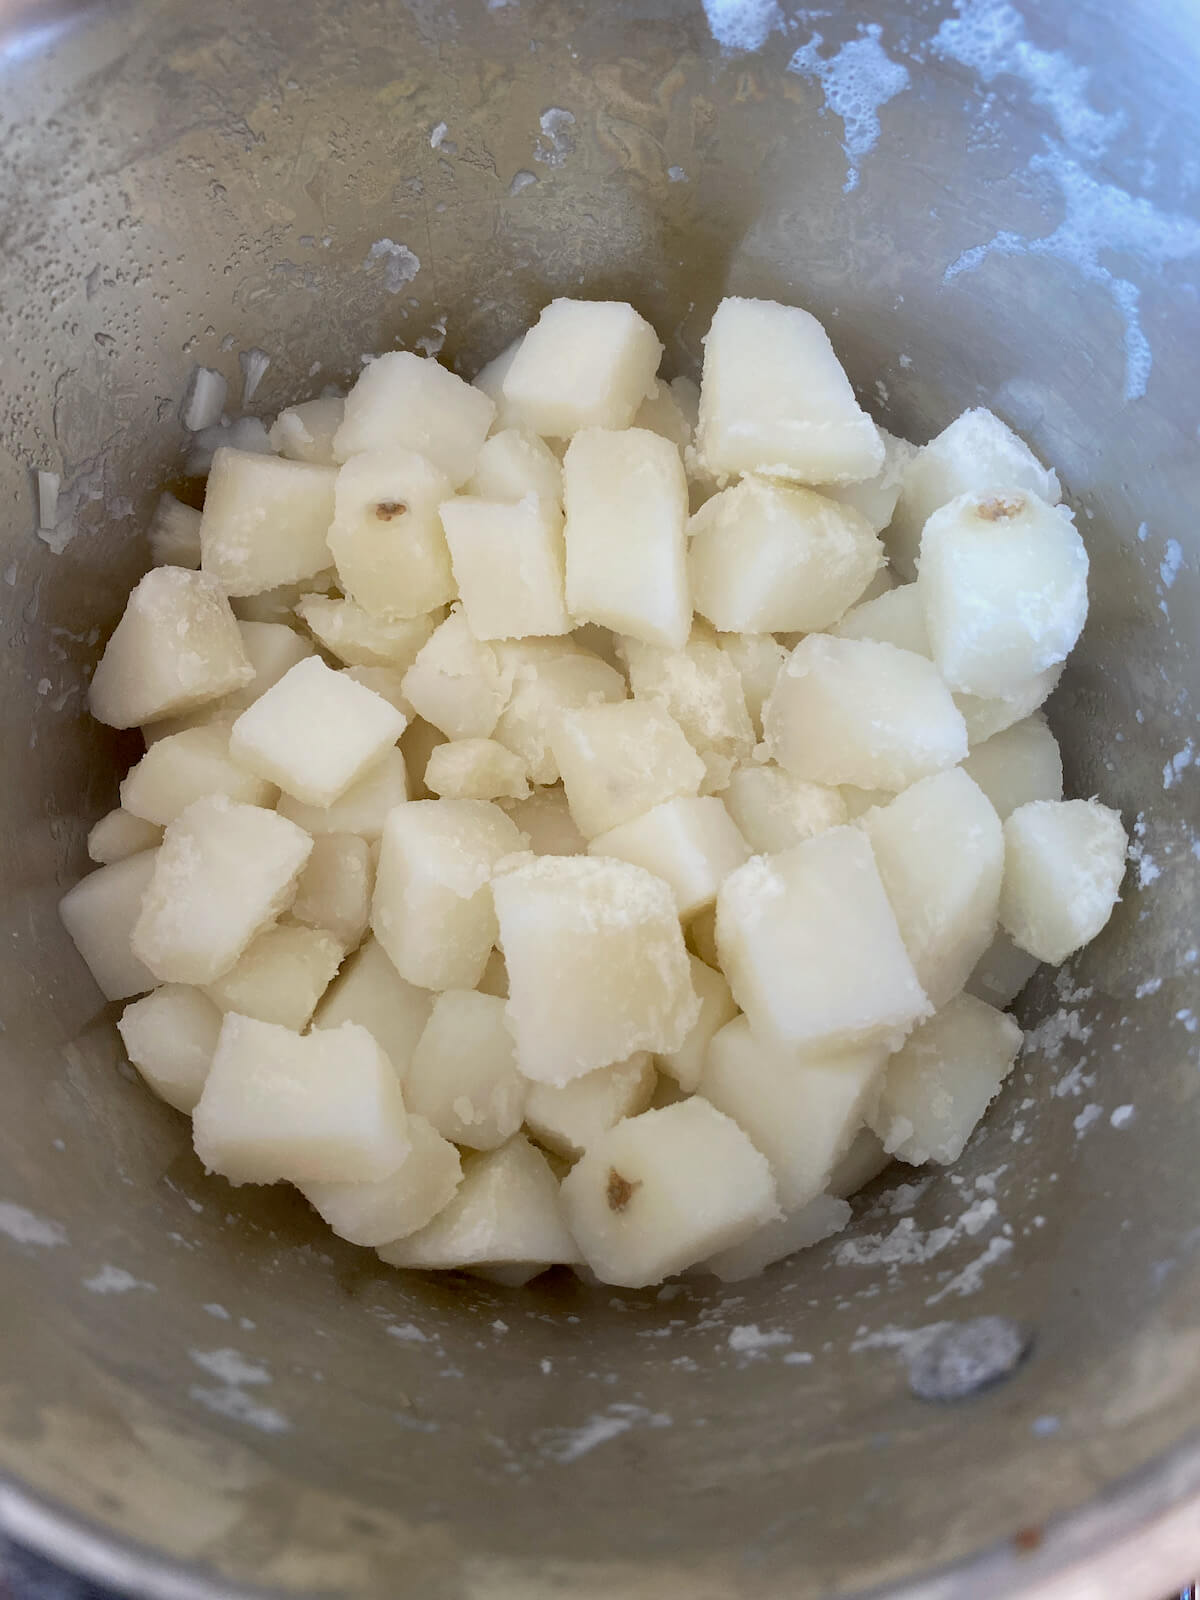 Cooked diced potatoes in a stainless steel pot.